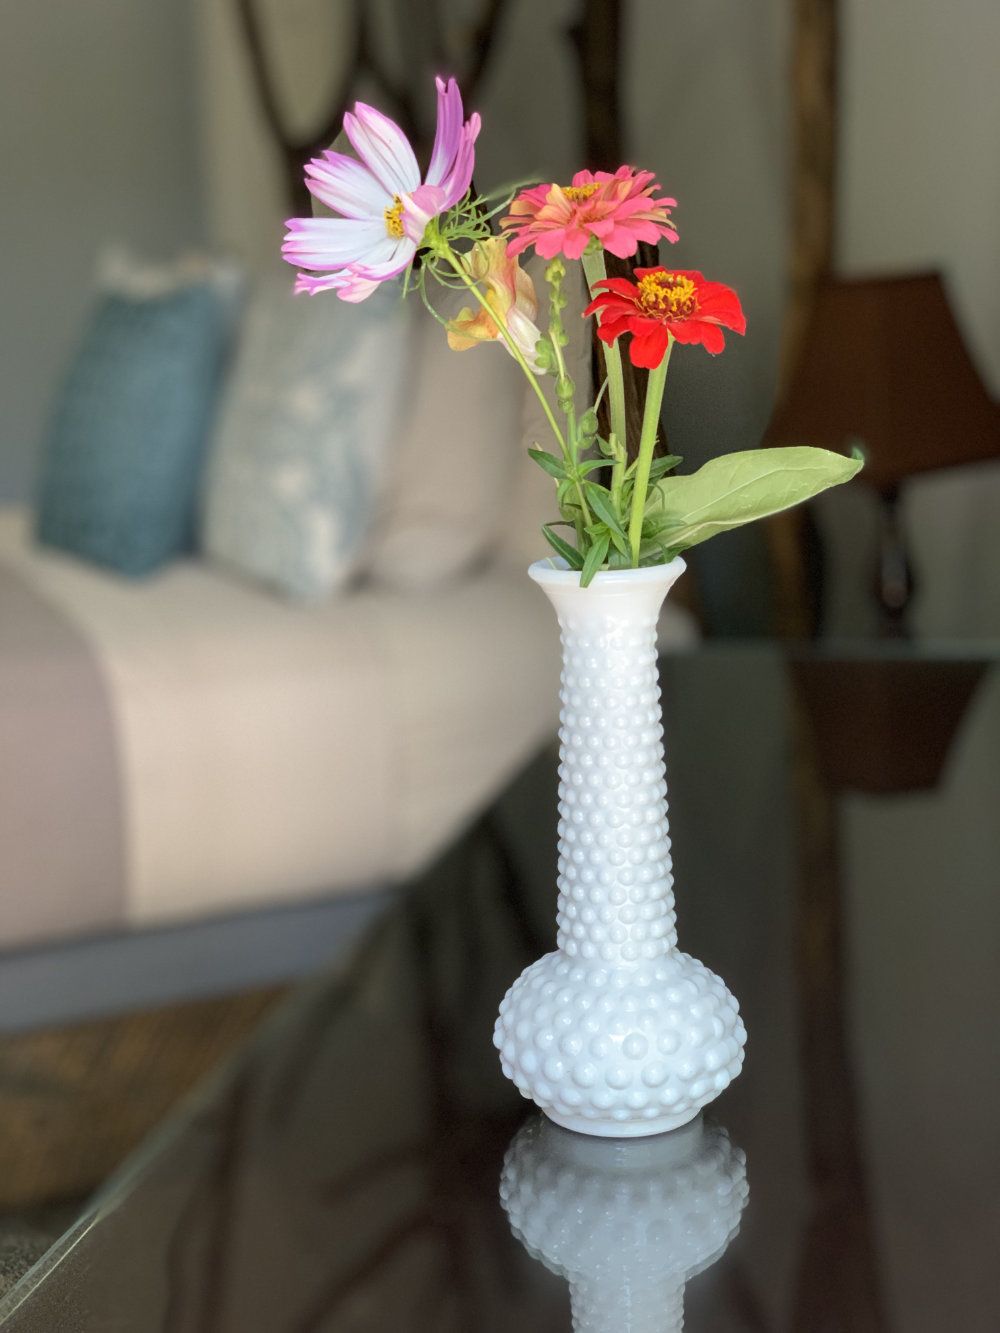 A multi-colored flower bouquet in a white vase sits on a desk. In the background, the bed and the nightstand are pictured.